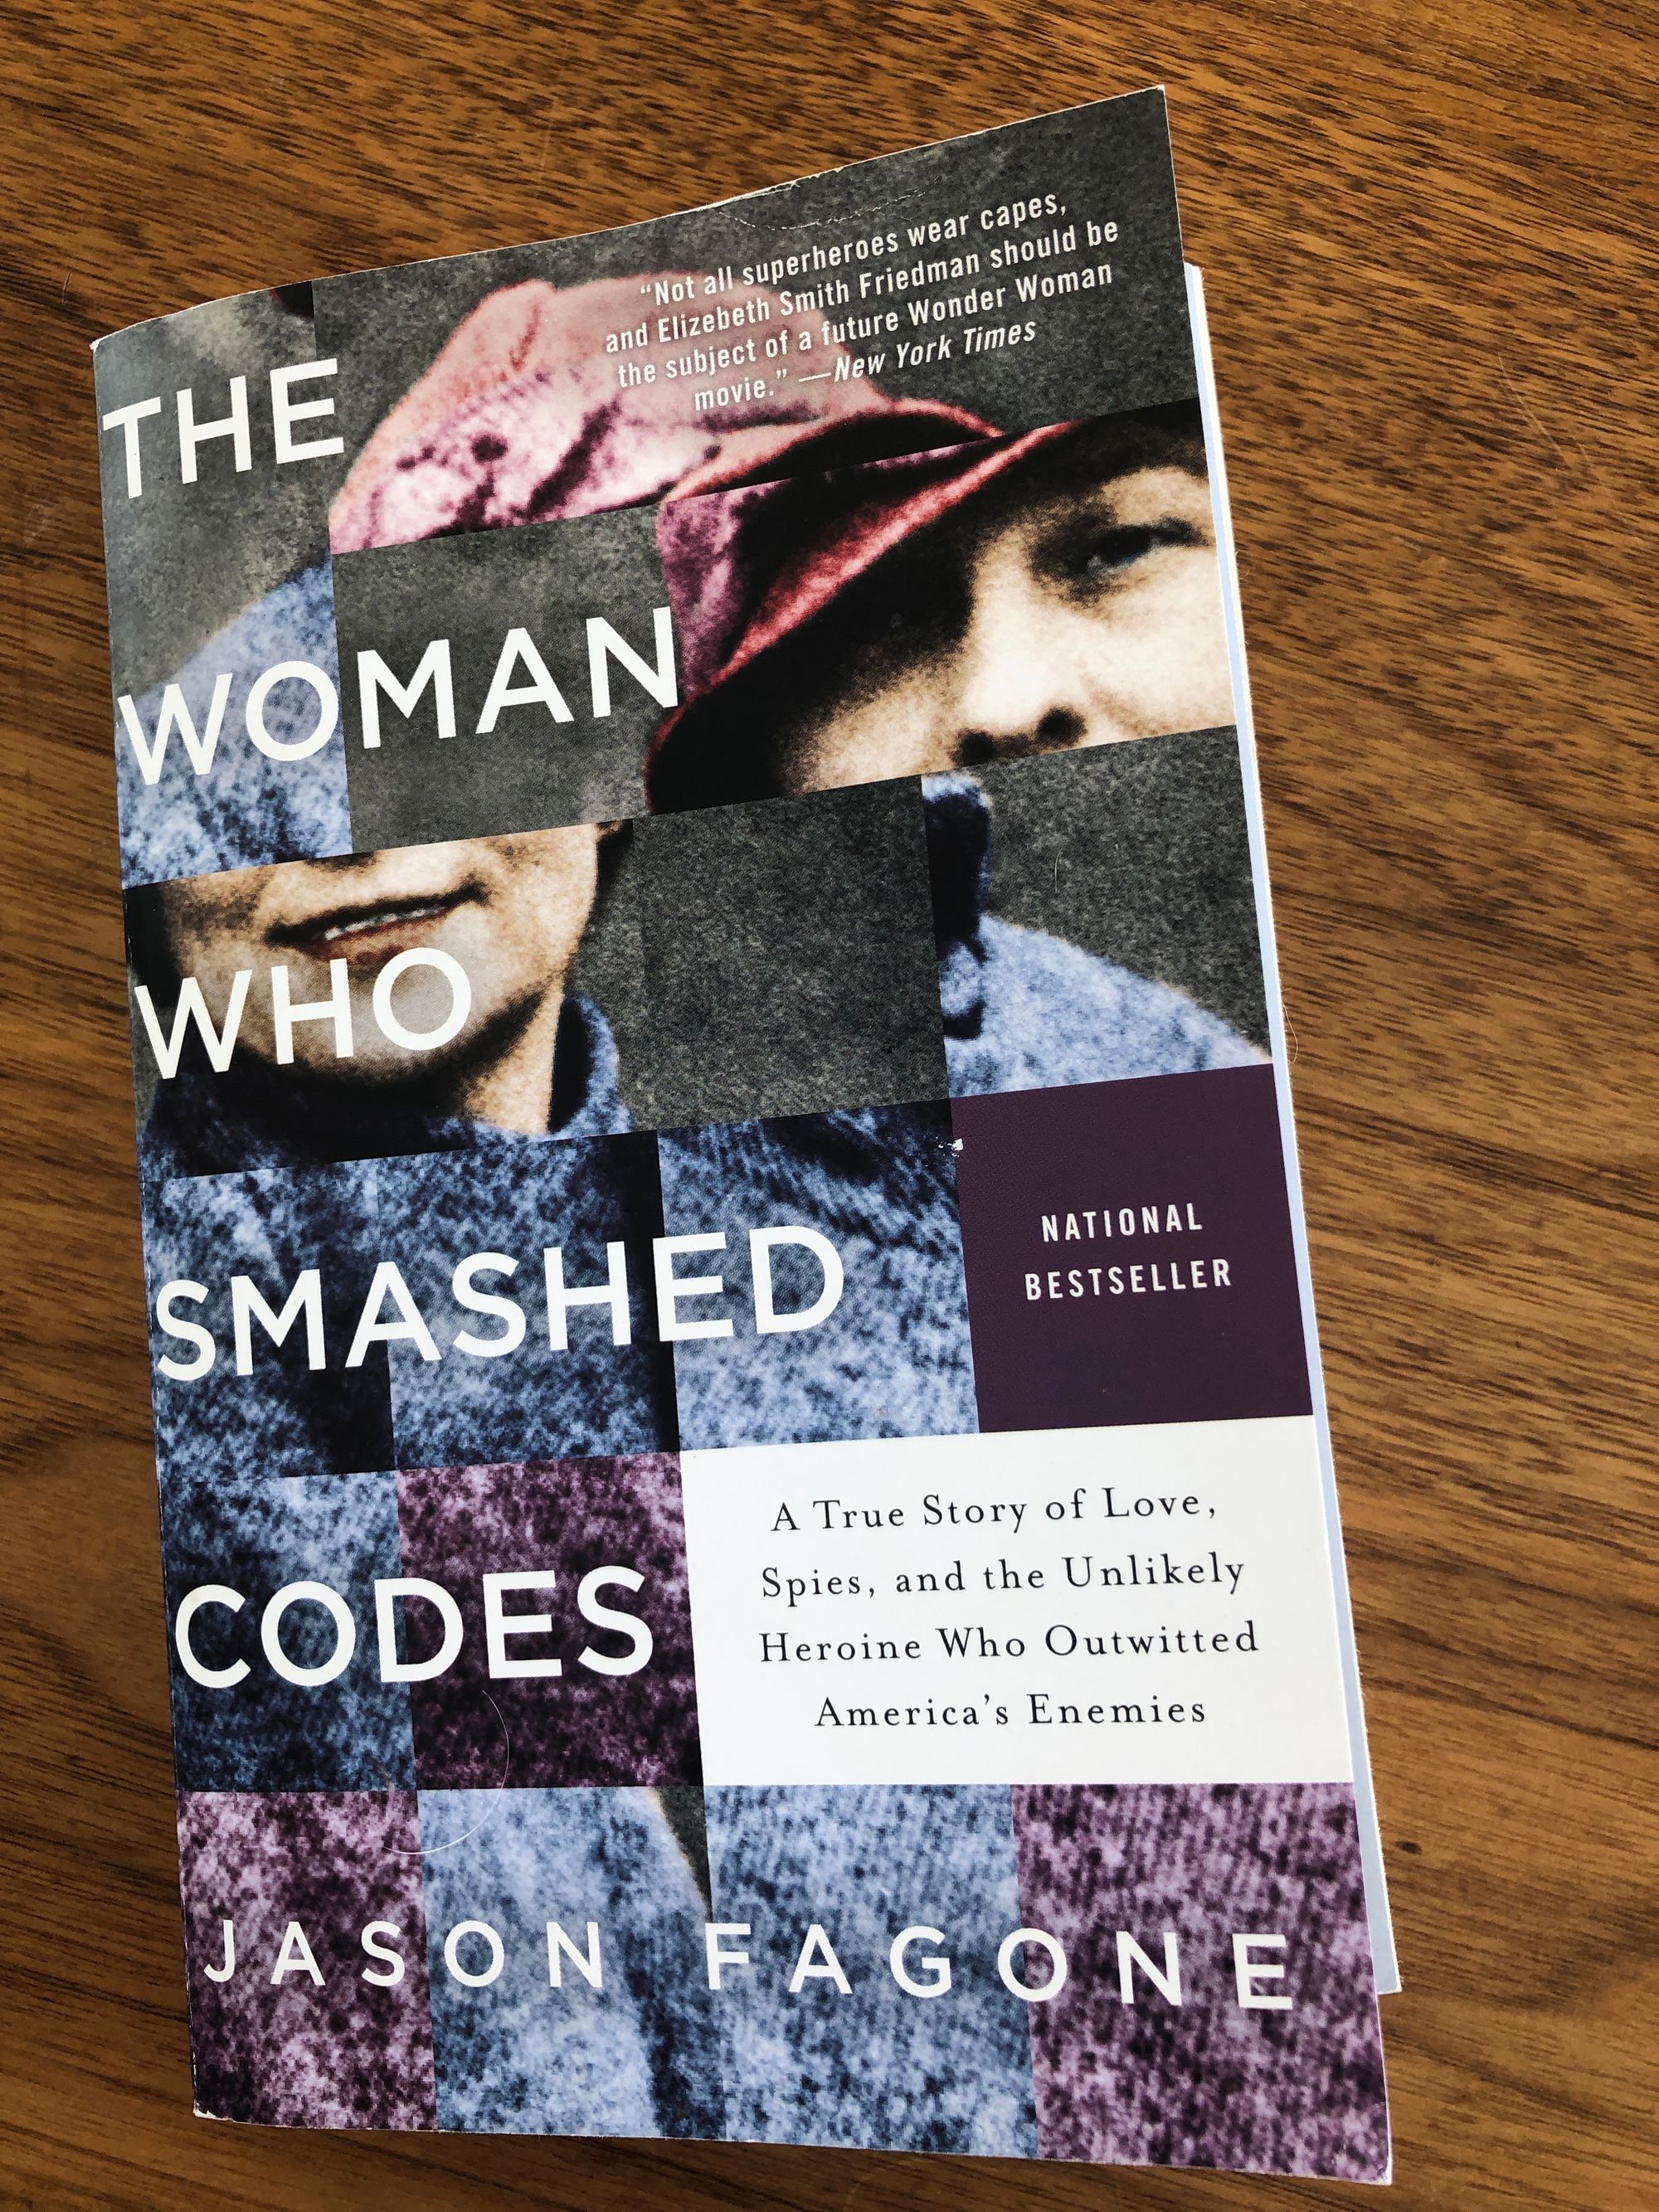 Book: The Woman Who Smashed Codes